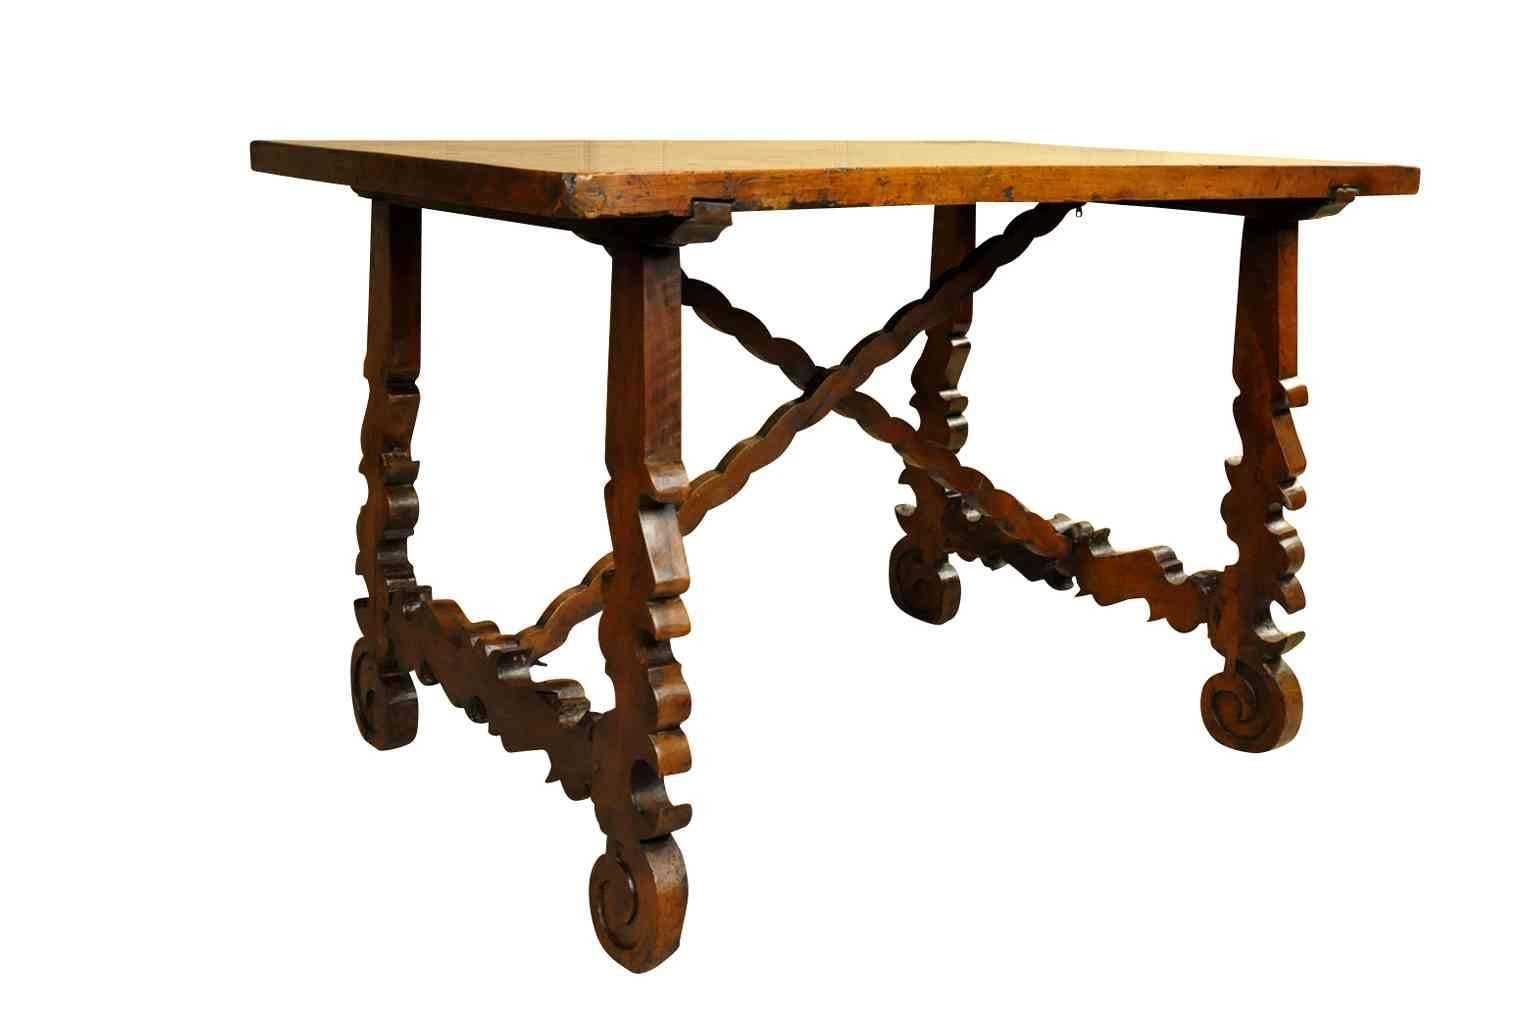 An exceptional late 17th century side table from the Catalan region of Spain. Constructed in walnut with a tremendous solid board top. The patina is outstanding - sumptuous and luminous. Beautifully sculpted lyre legs. Serves wonderfully as a